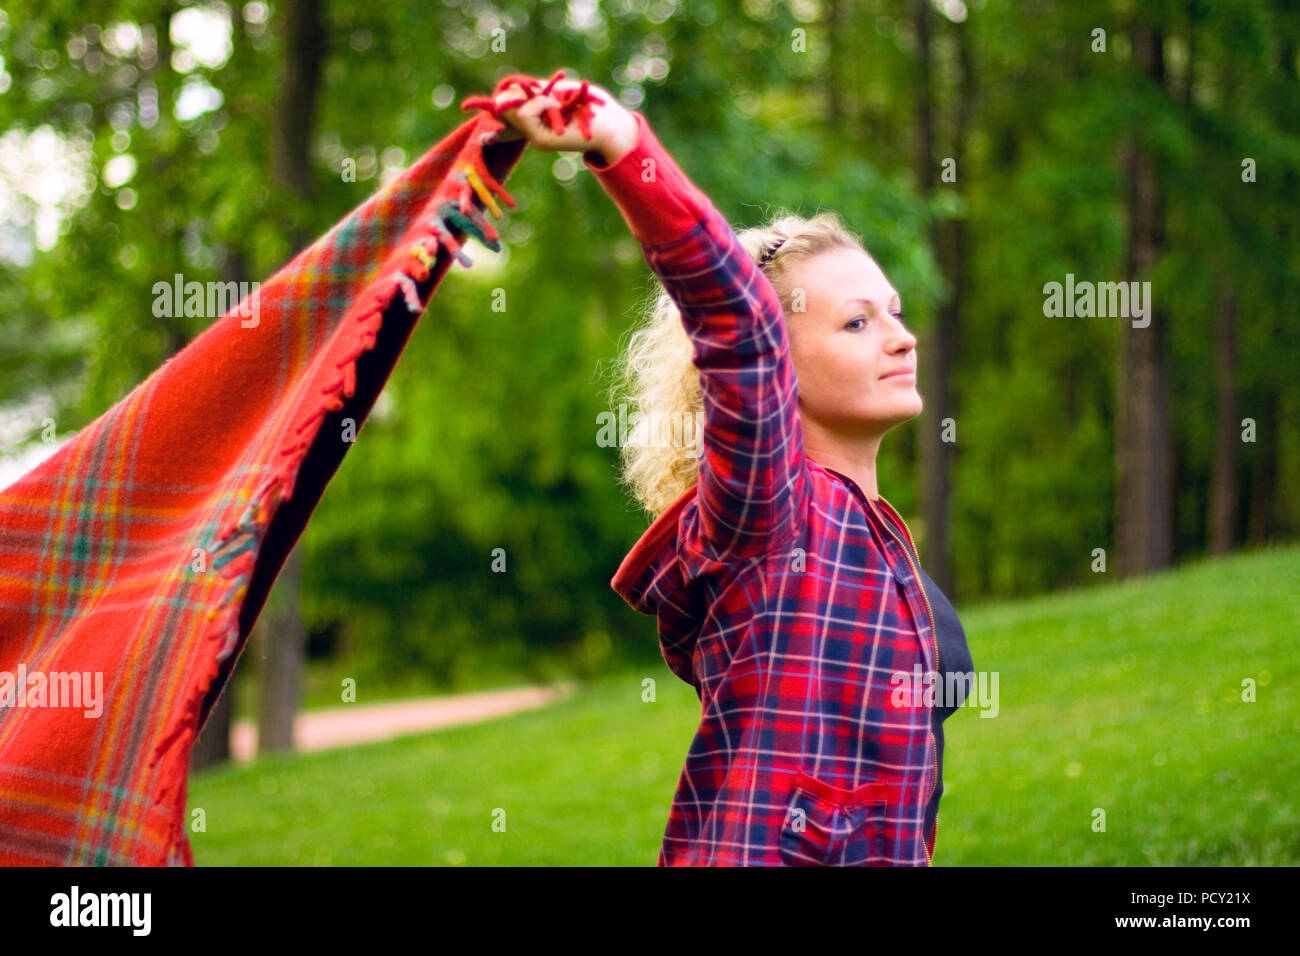 pretty woman with red coverlet in the forest Stock Photo